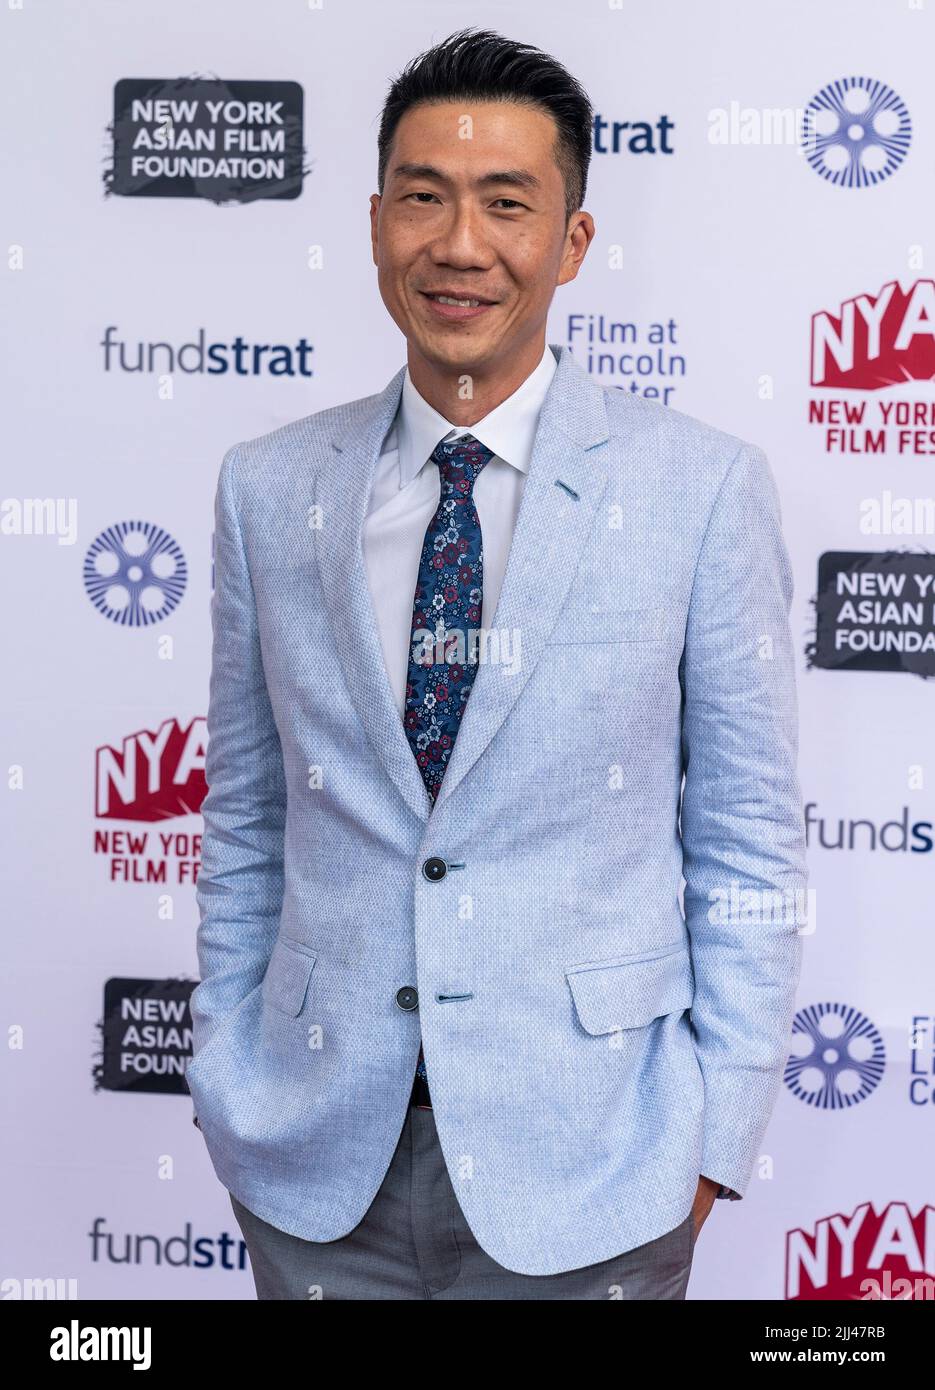 New York, USA. 22nd July, 2022. Director Ken Kwek attends 7th day of New York Asian Film Festival at Furman Gallery Film at Lincoln Center (Photo by Lev Radin/Pacific Press) Credit: Pacific Press Media Production Corp./Alamy Live News Stock Photo